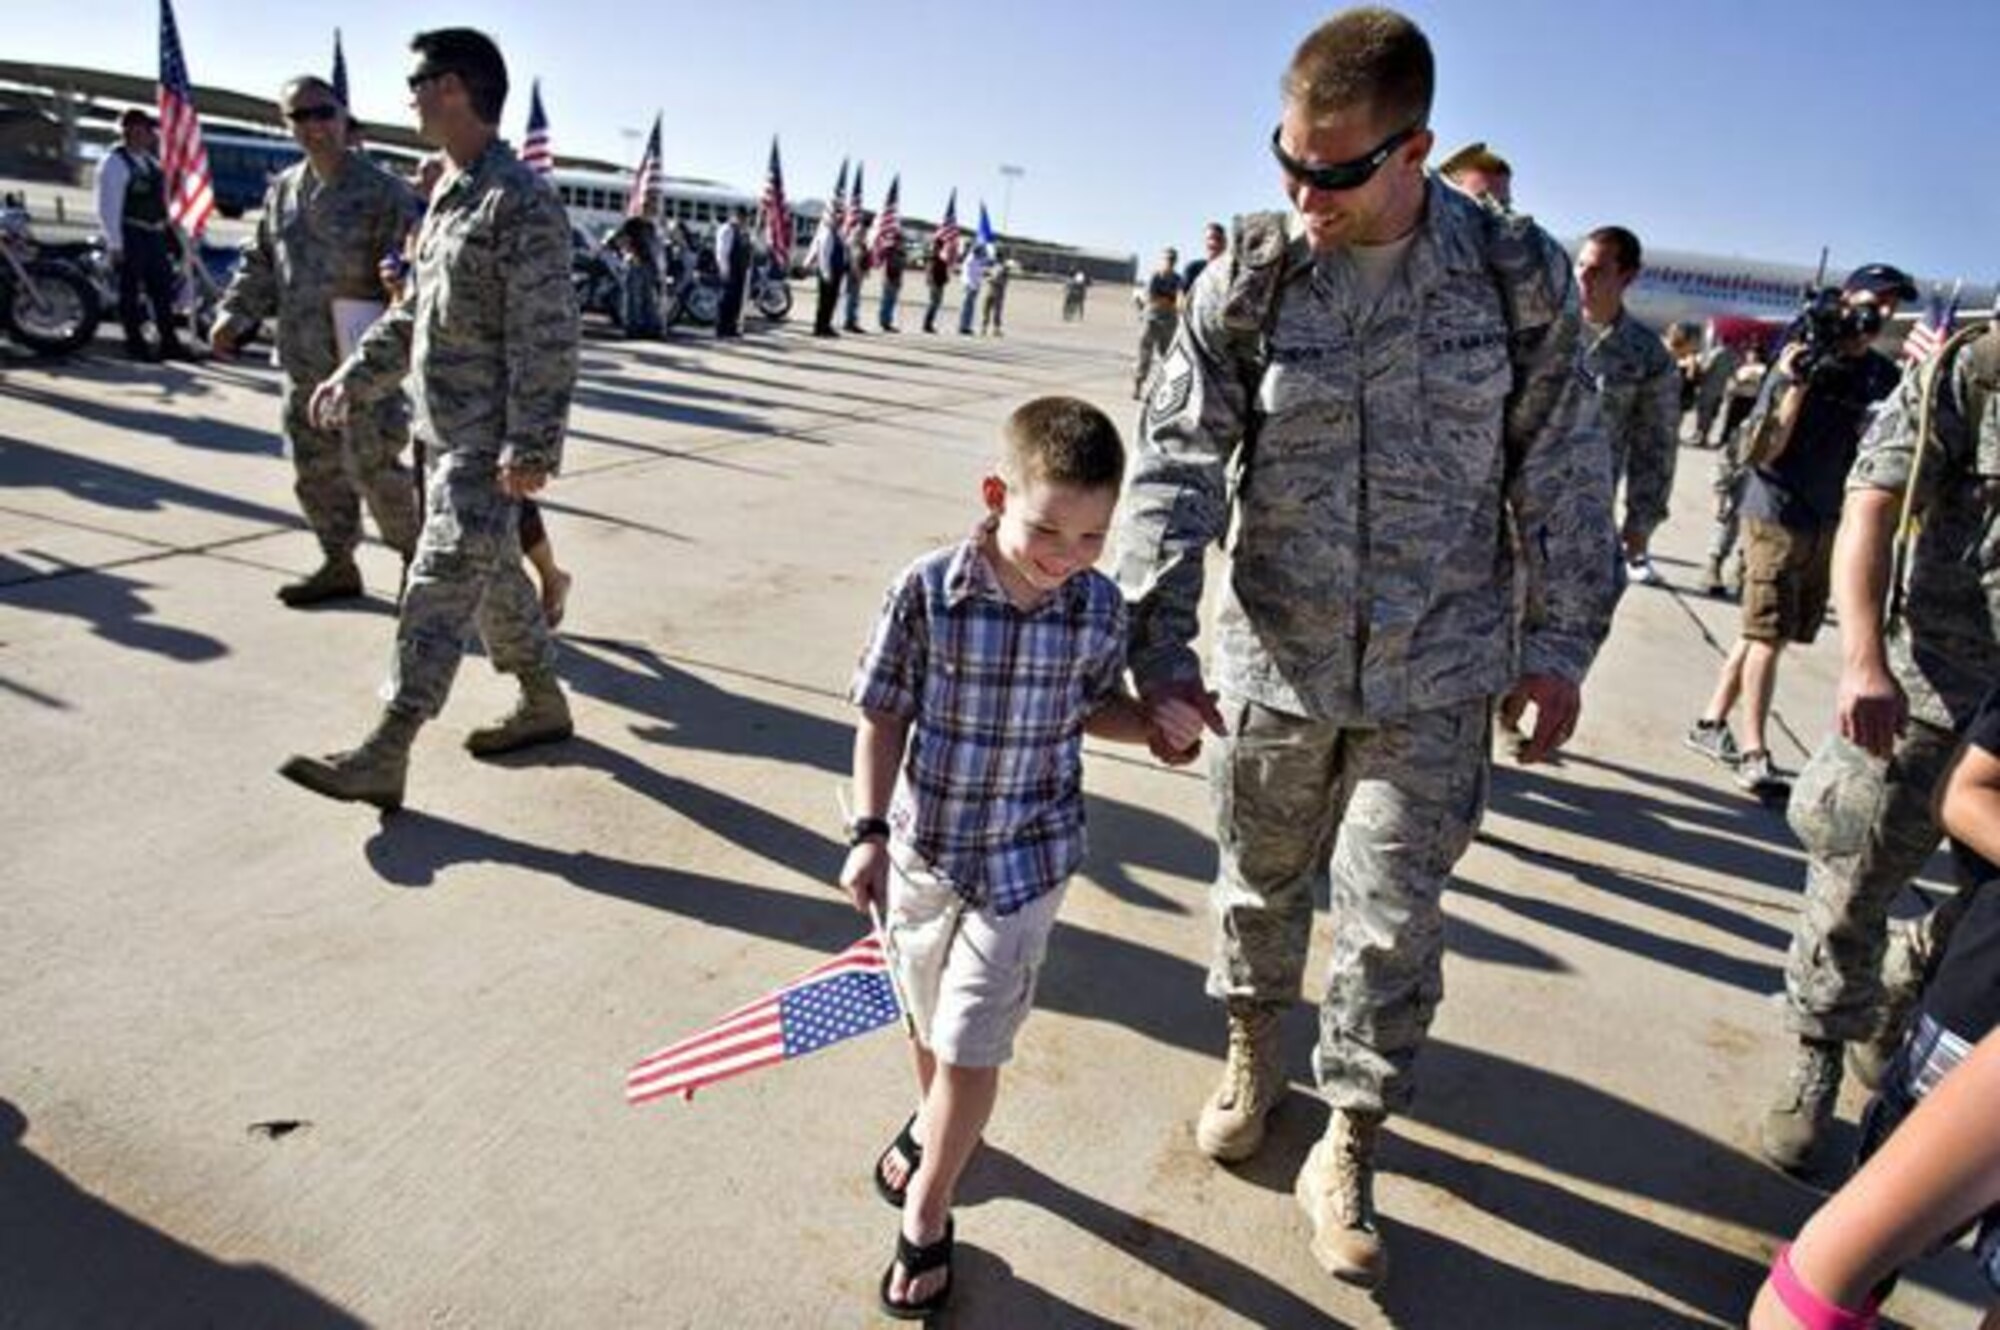 Master Sgt. Michael Condon walks with his son Gavin Condon after returning from a six-month deployment in Afghanistan. The 729th Air Control Squadron of the U.S. Air Force returned home to Hill Air Force Base in Layton on Wednesday, July 20, 2011.